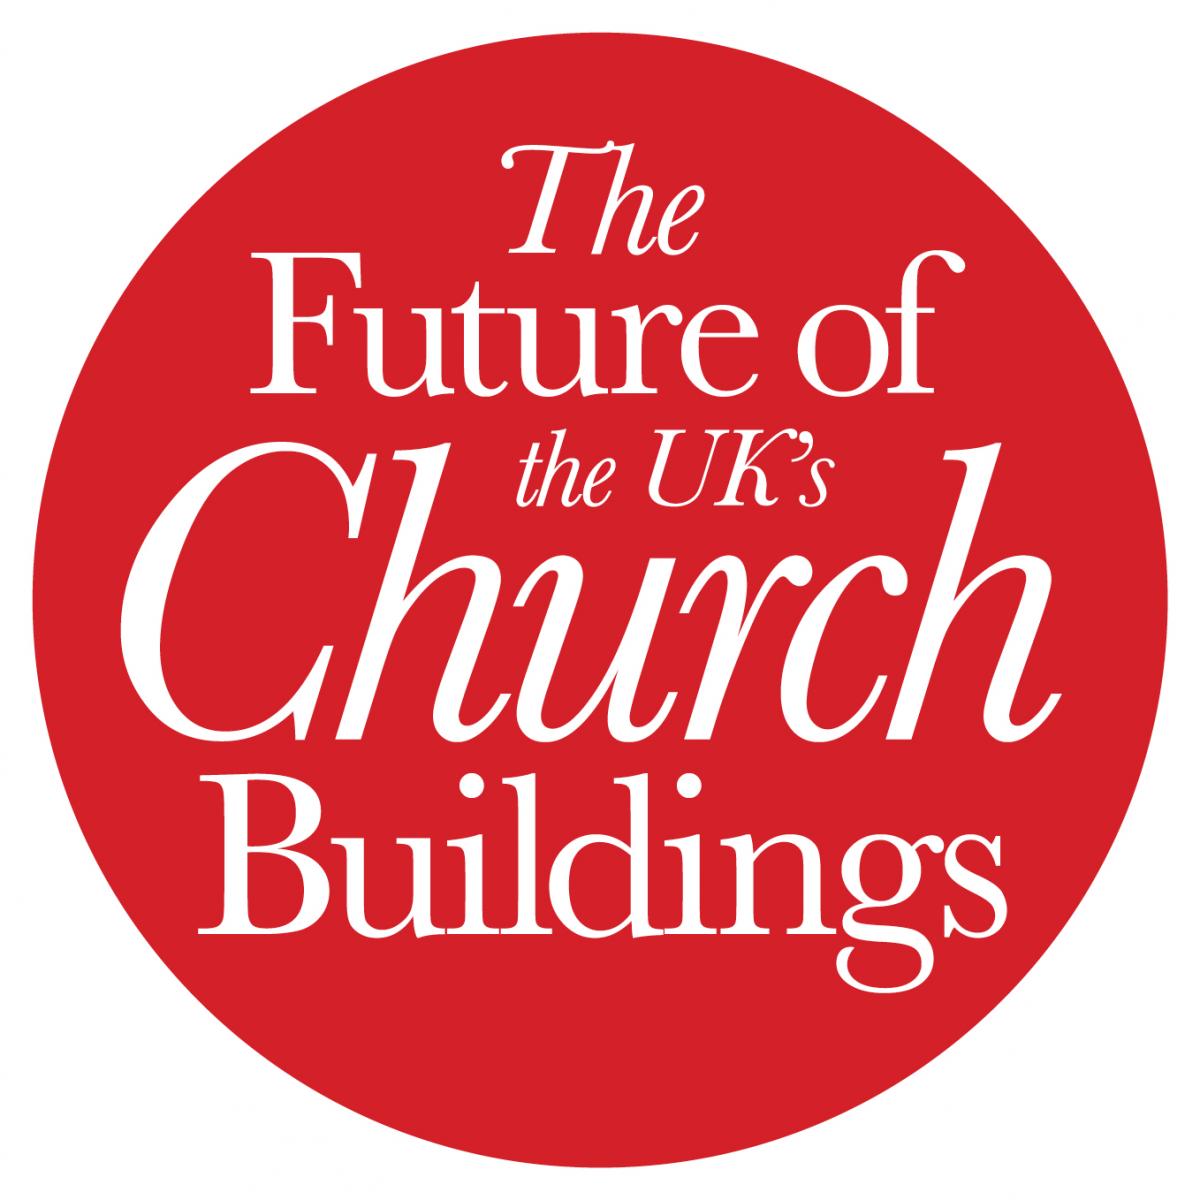 Future of the UK's Church Buildings